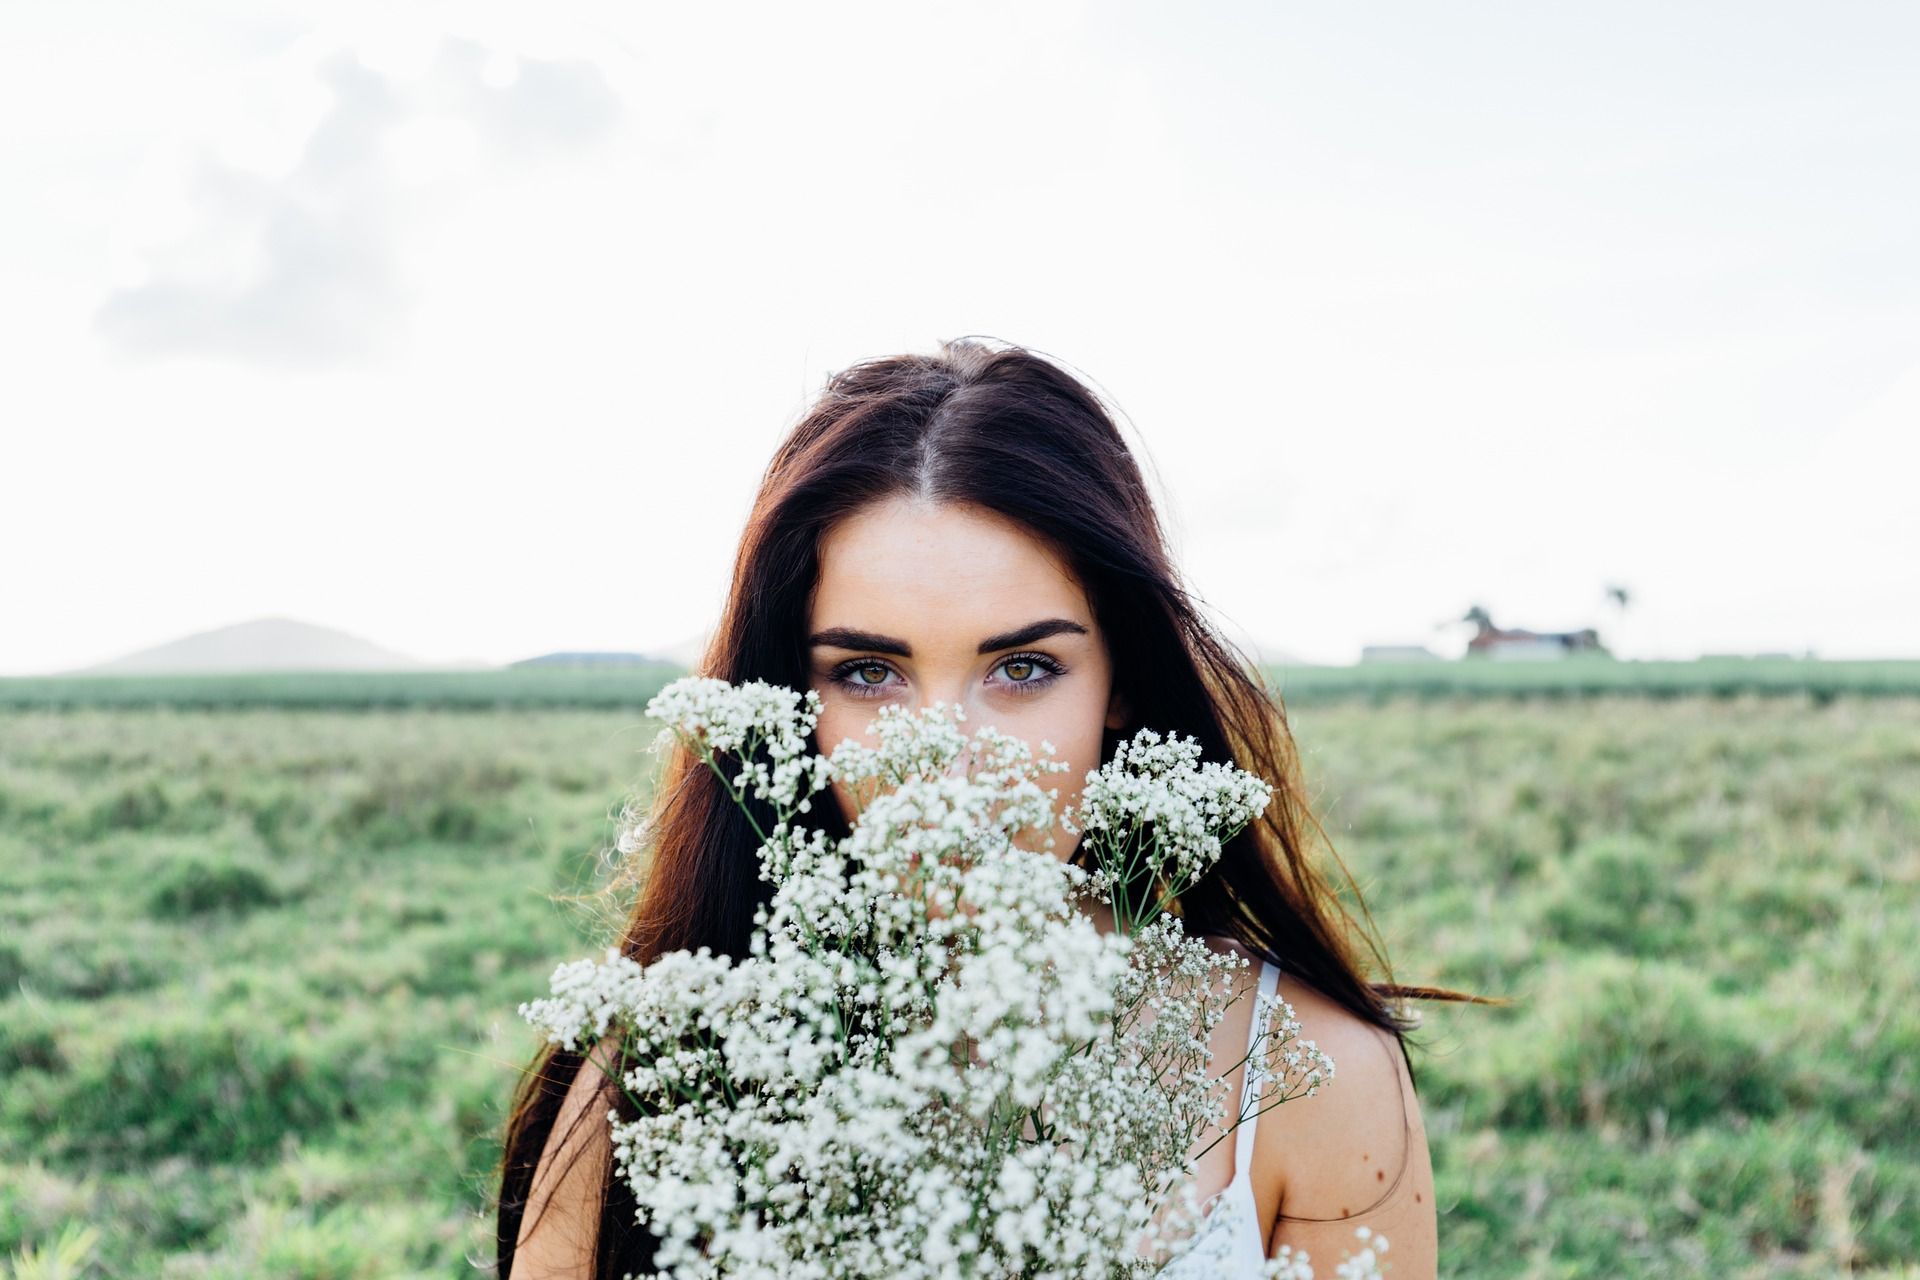 young woman pretty girl flowers white bouquet spring green grass countryside nature brunette long hair smile smiling happy joy psychic